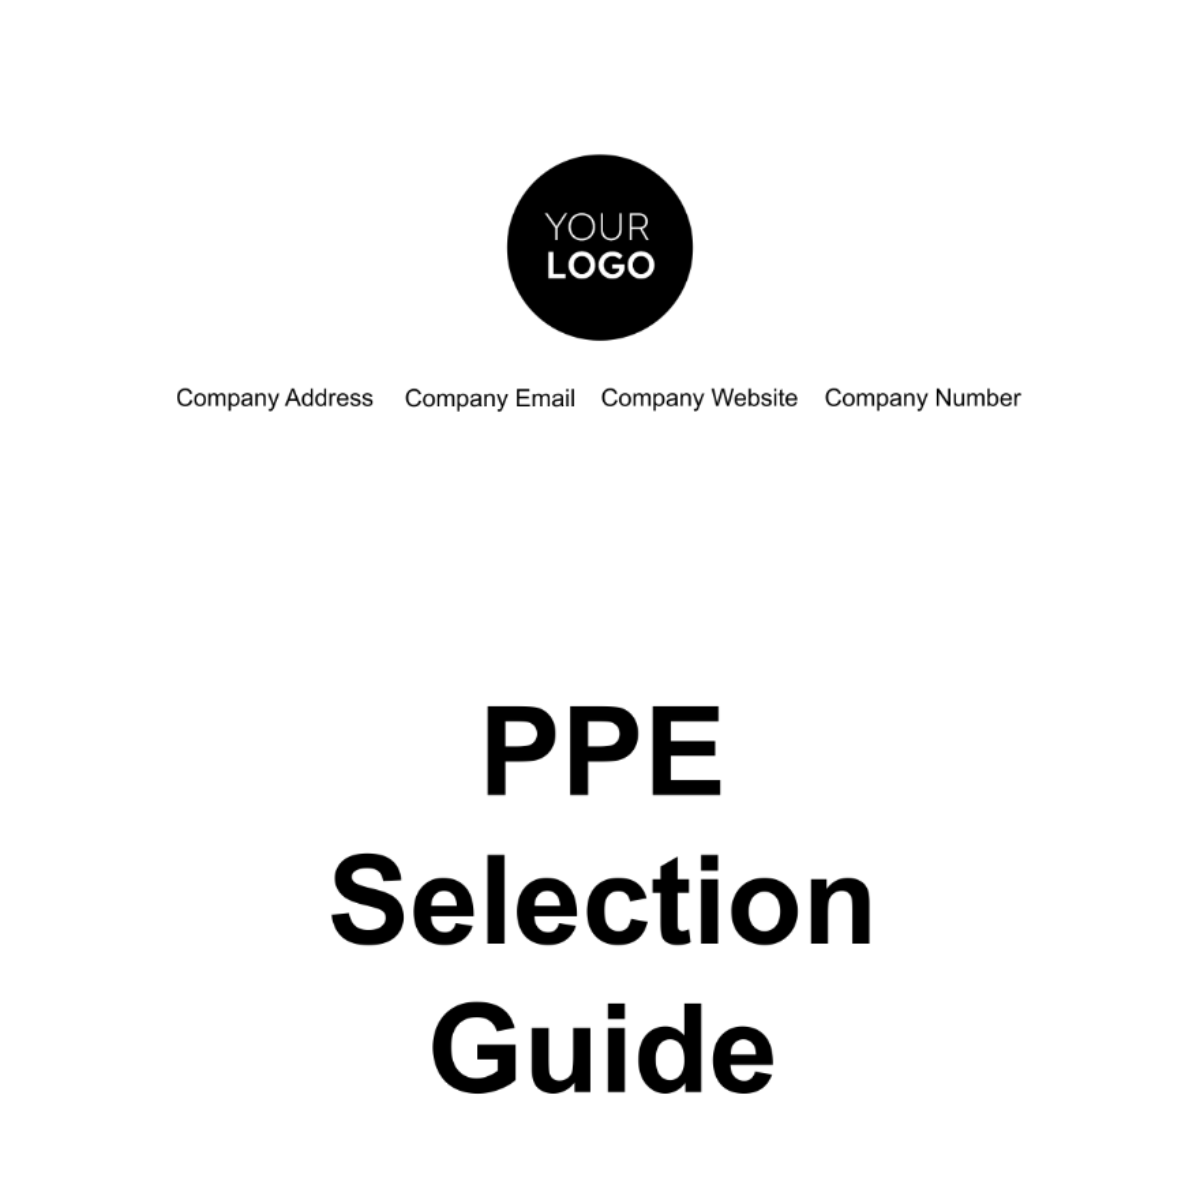 PPE Selection Guide Template